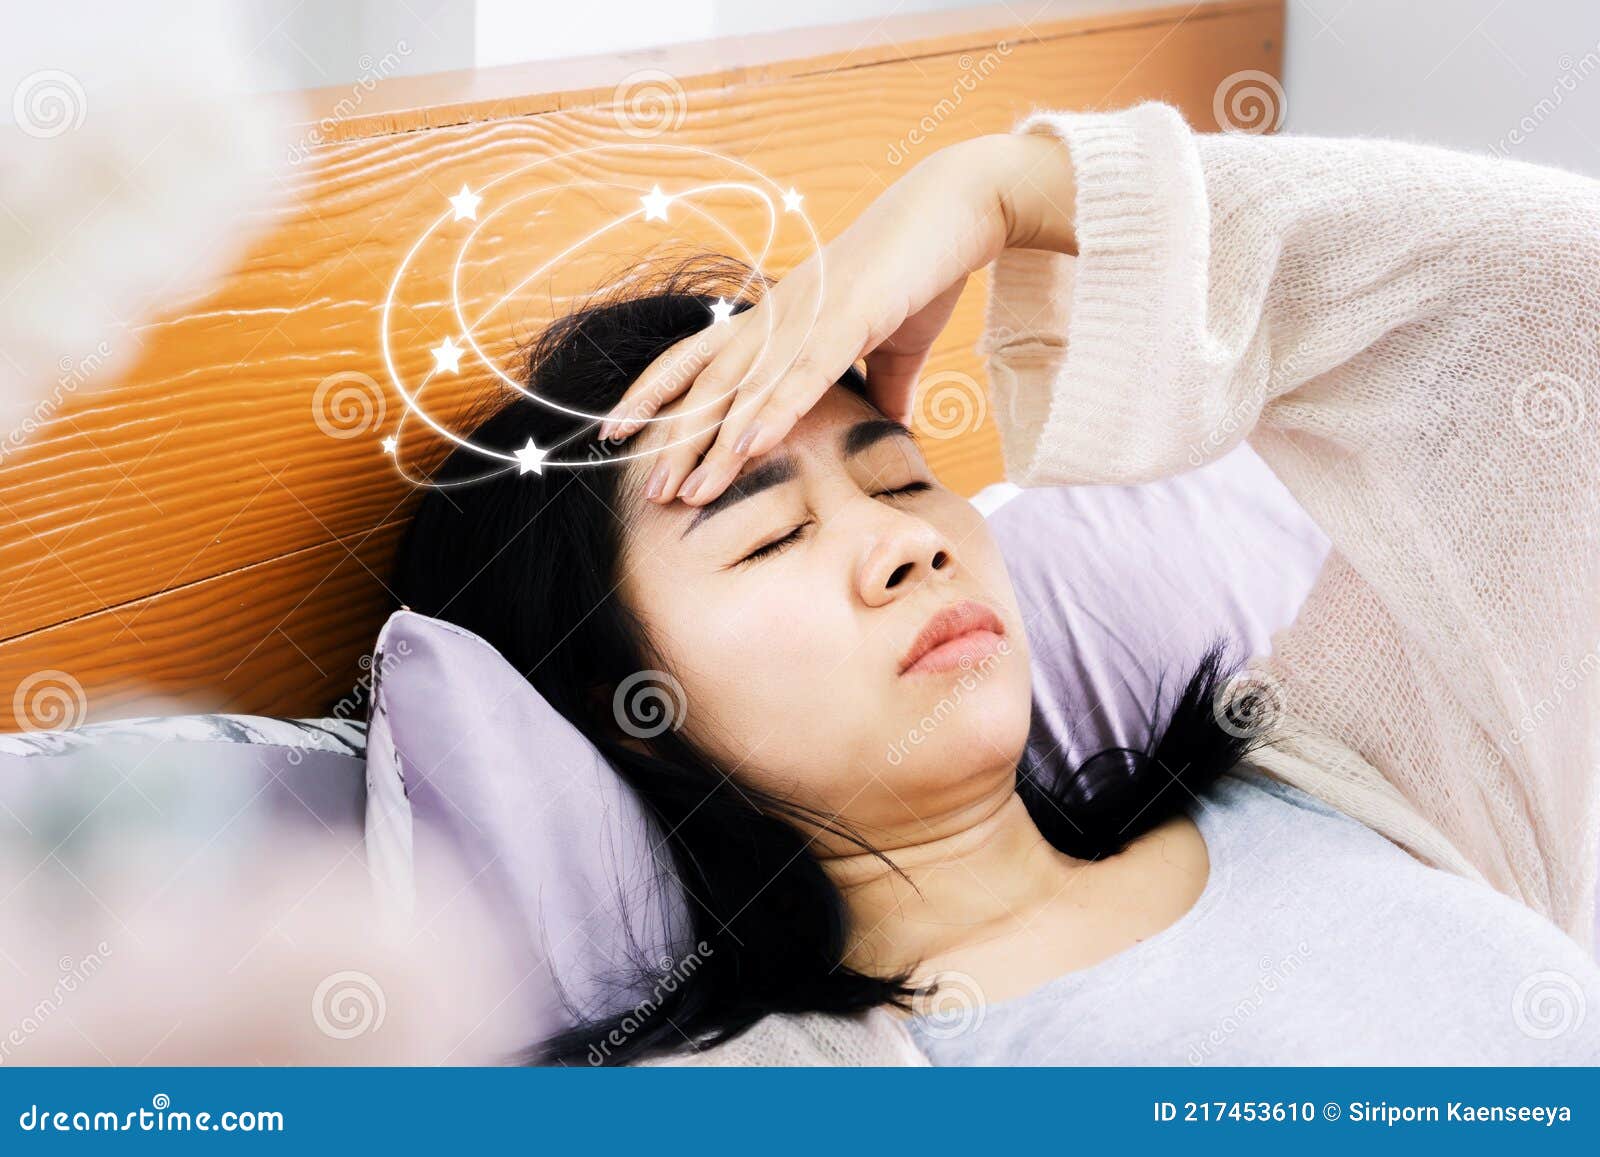 unwell asian woman suffering from dizziness after wakeup in morning hand holding her head lying down in bed